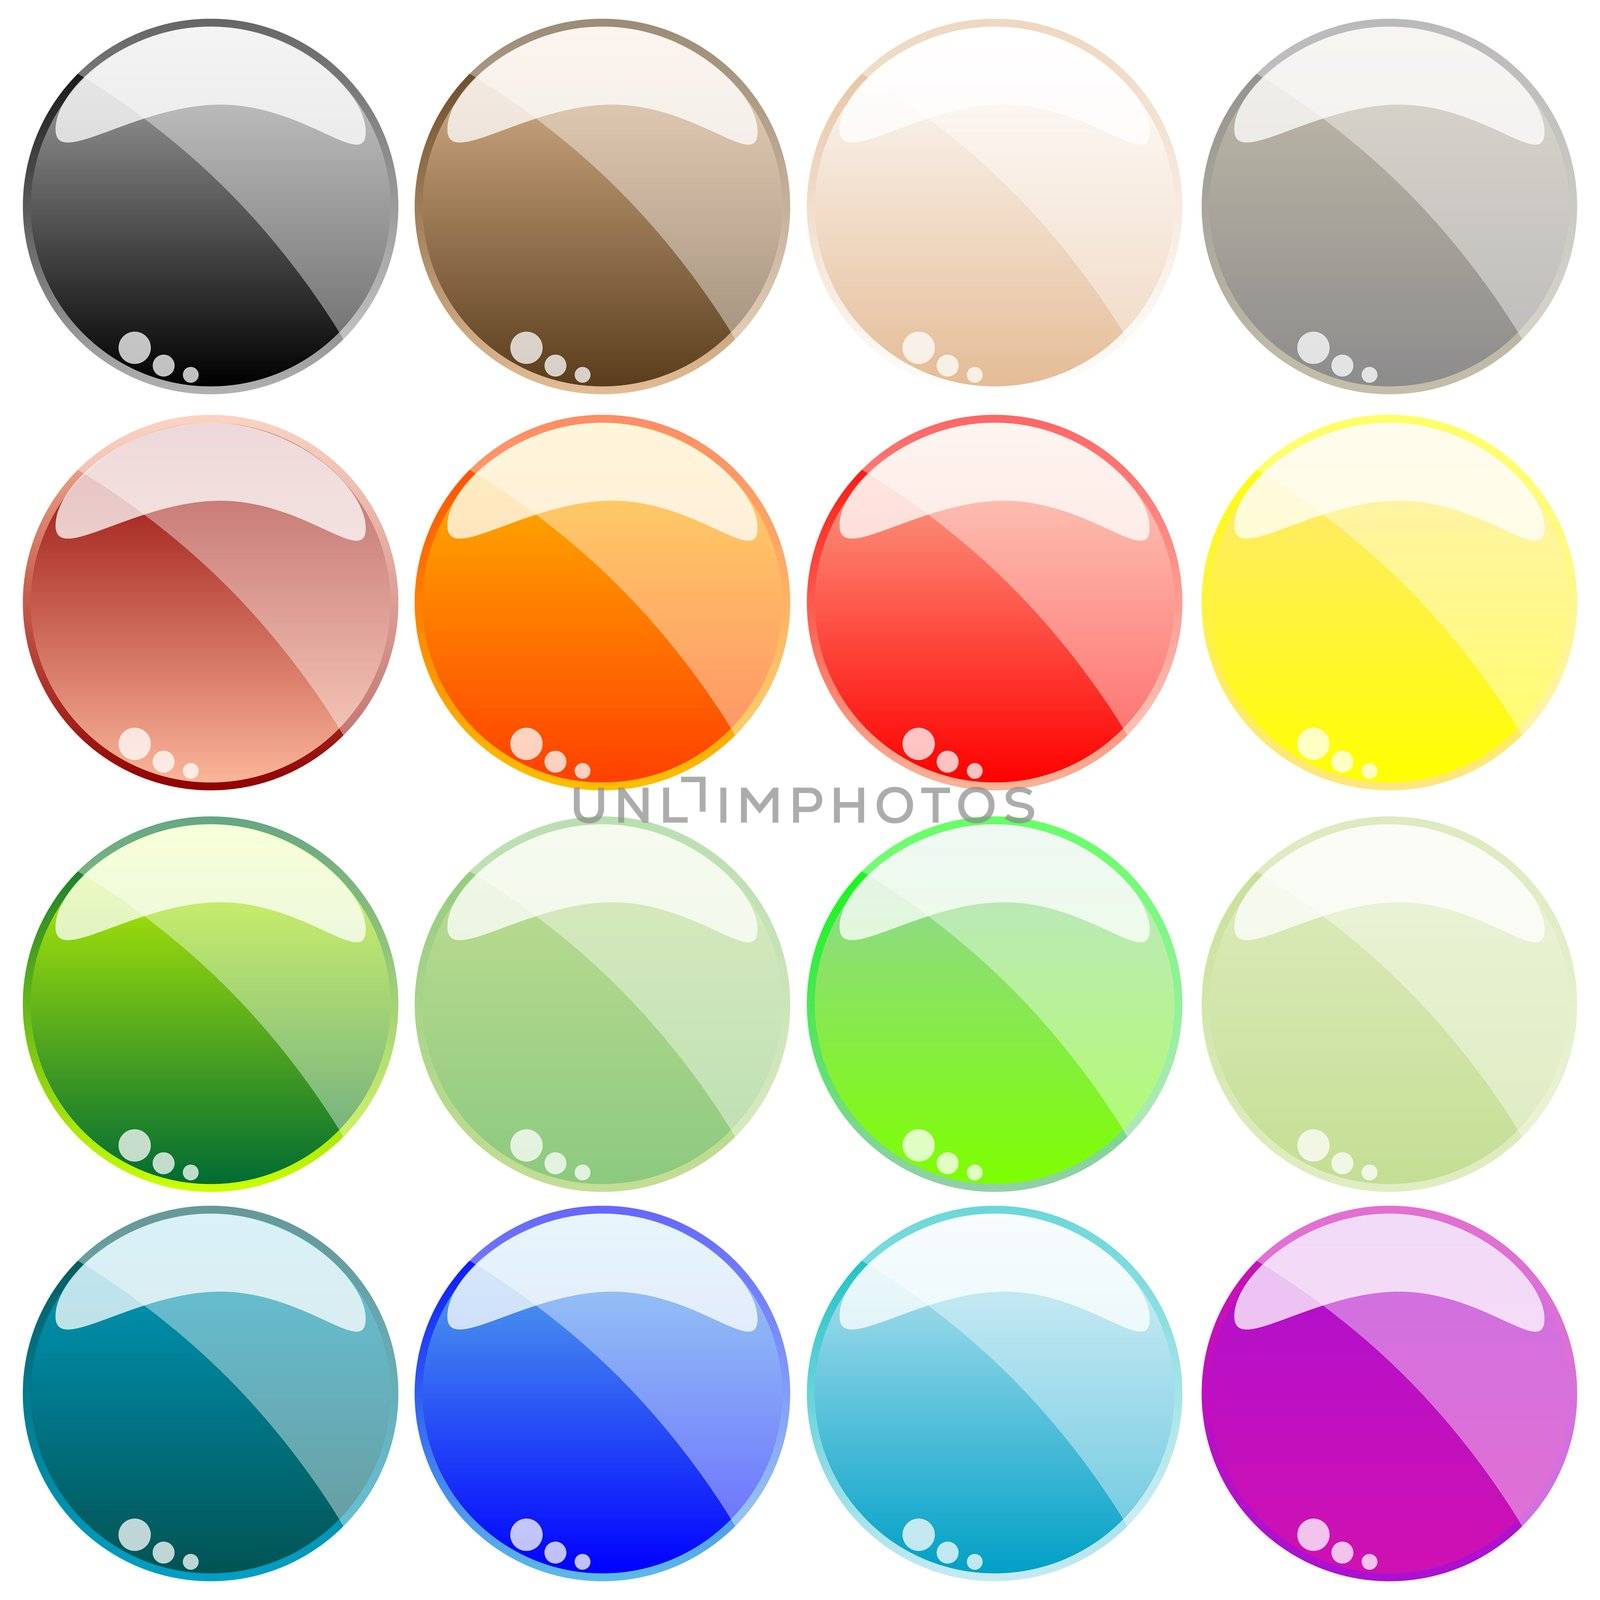 web buttons isolated on white background, abstract art illustration